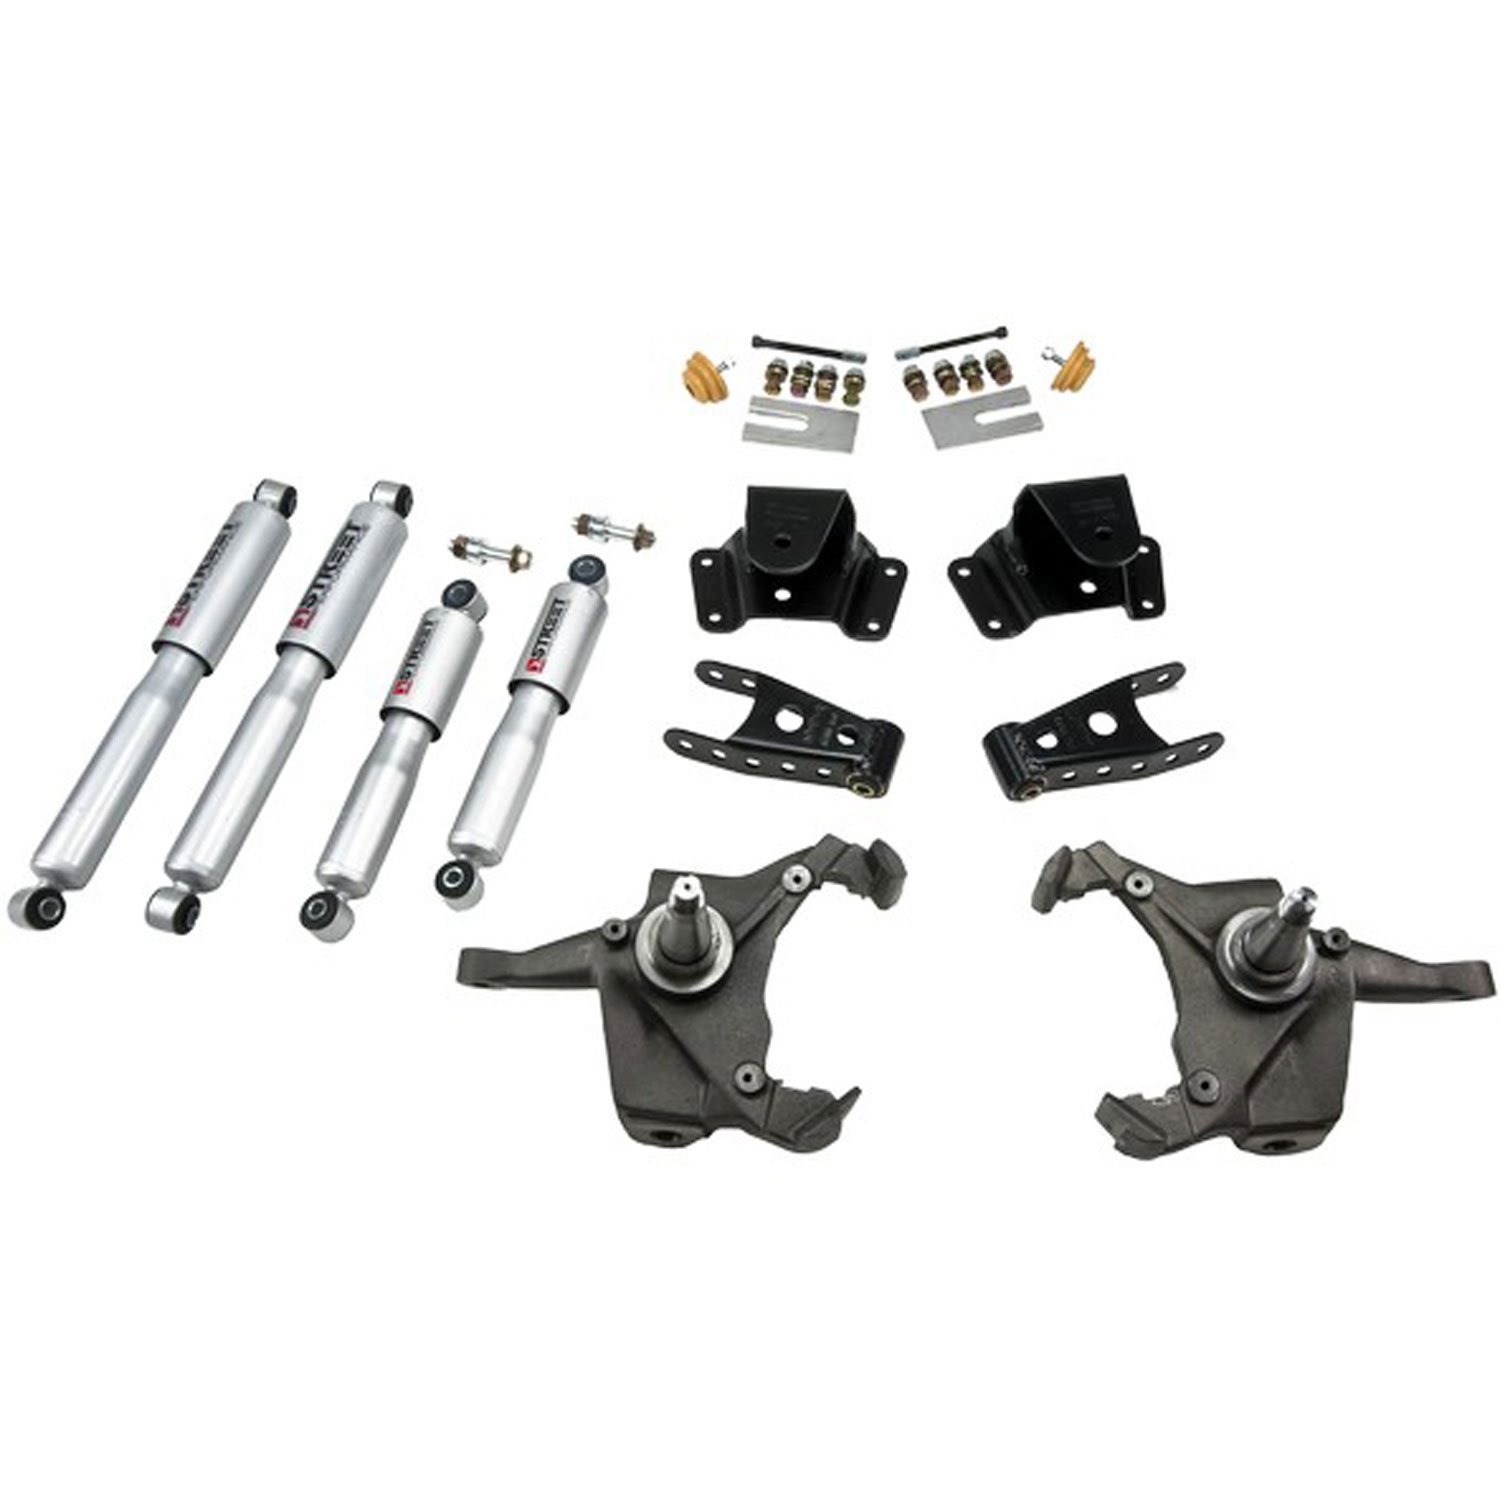 Complete Lowering Kit for 1975-1991 Chevy Silverado C30